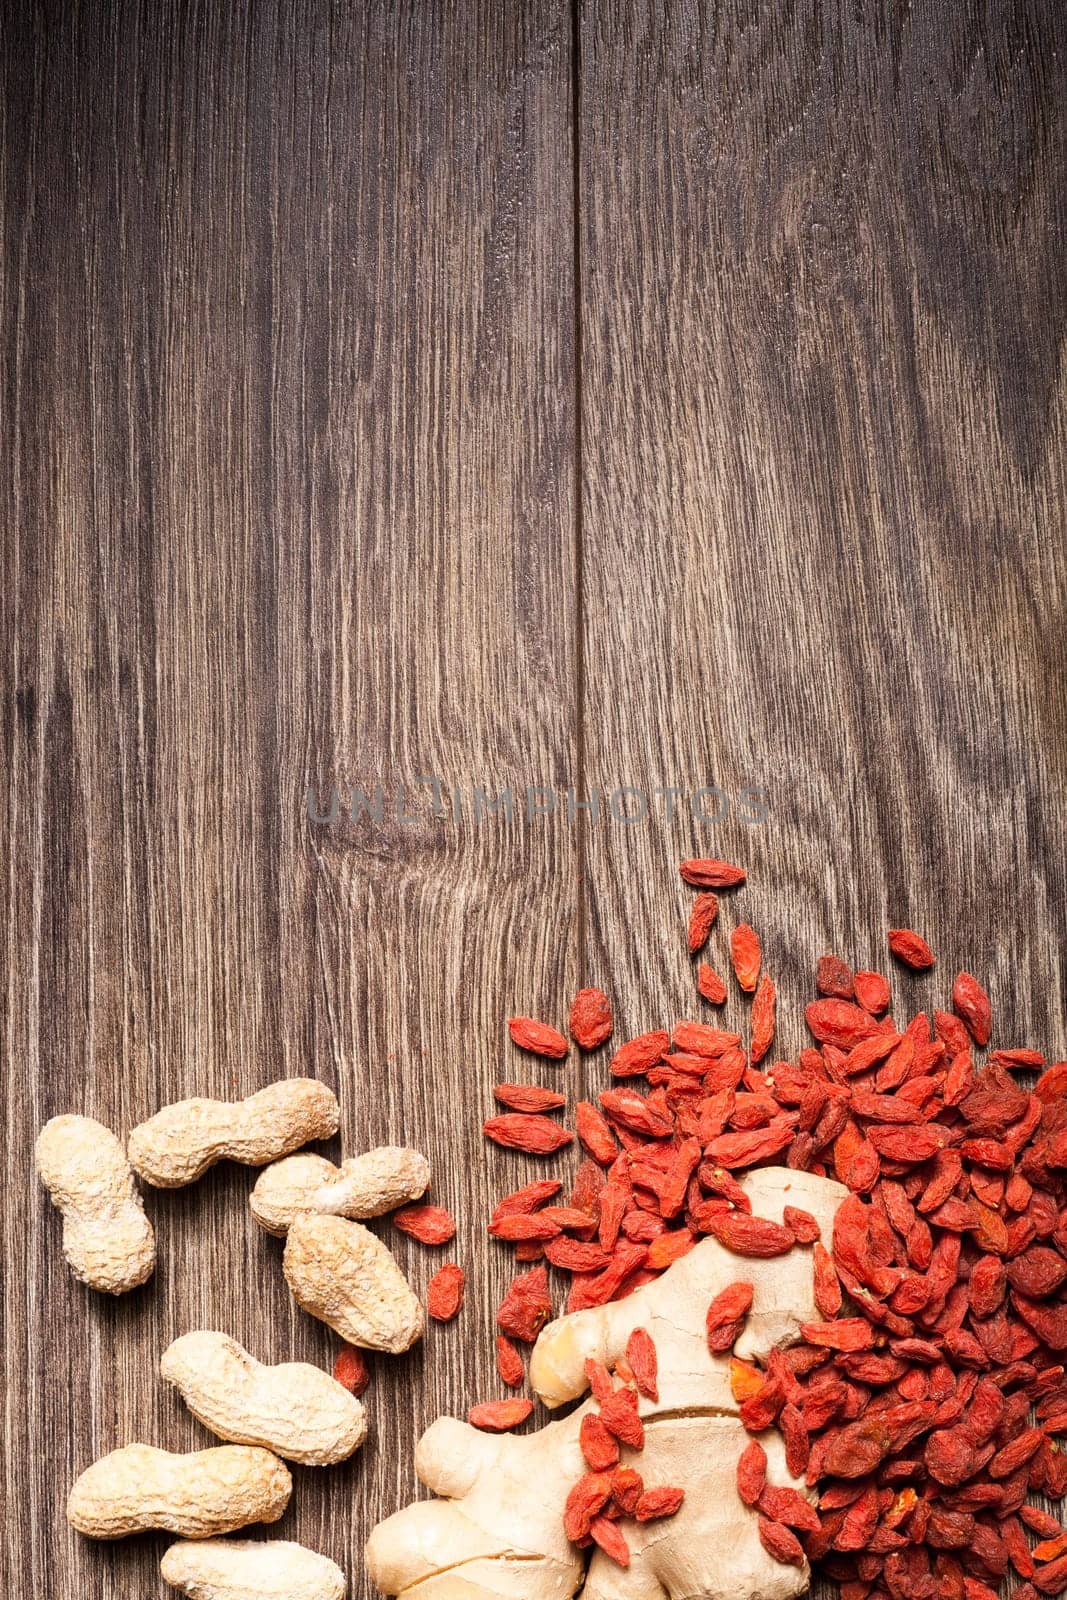 Raw organic food and nuts on wooden background. Over top view